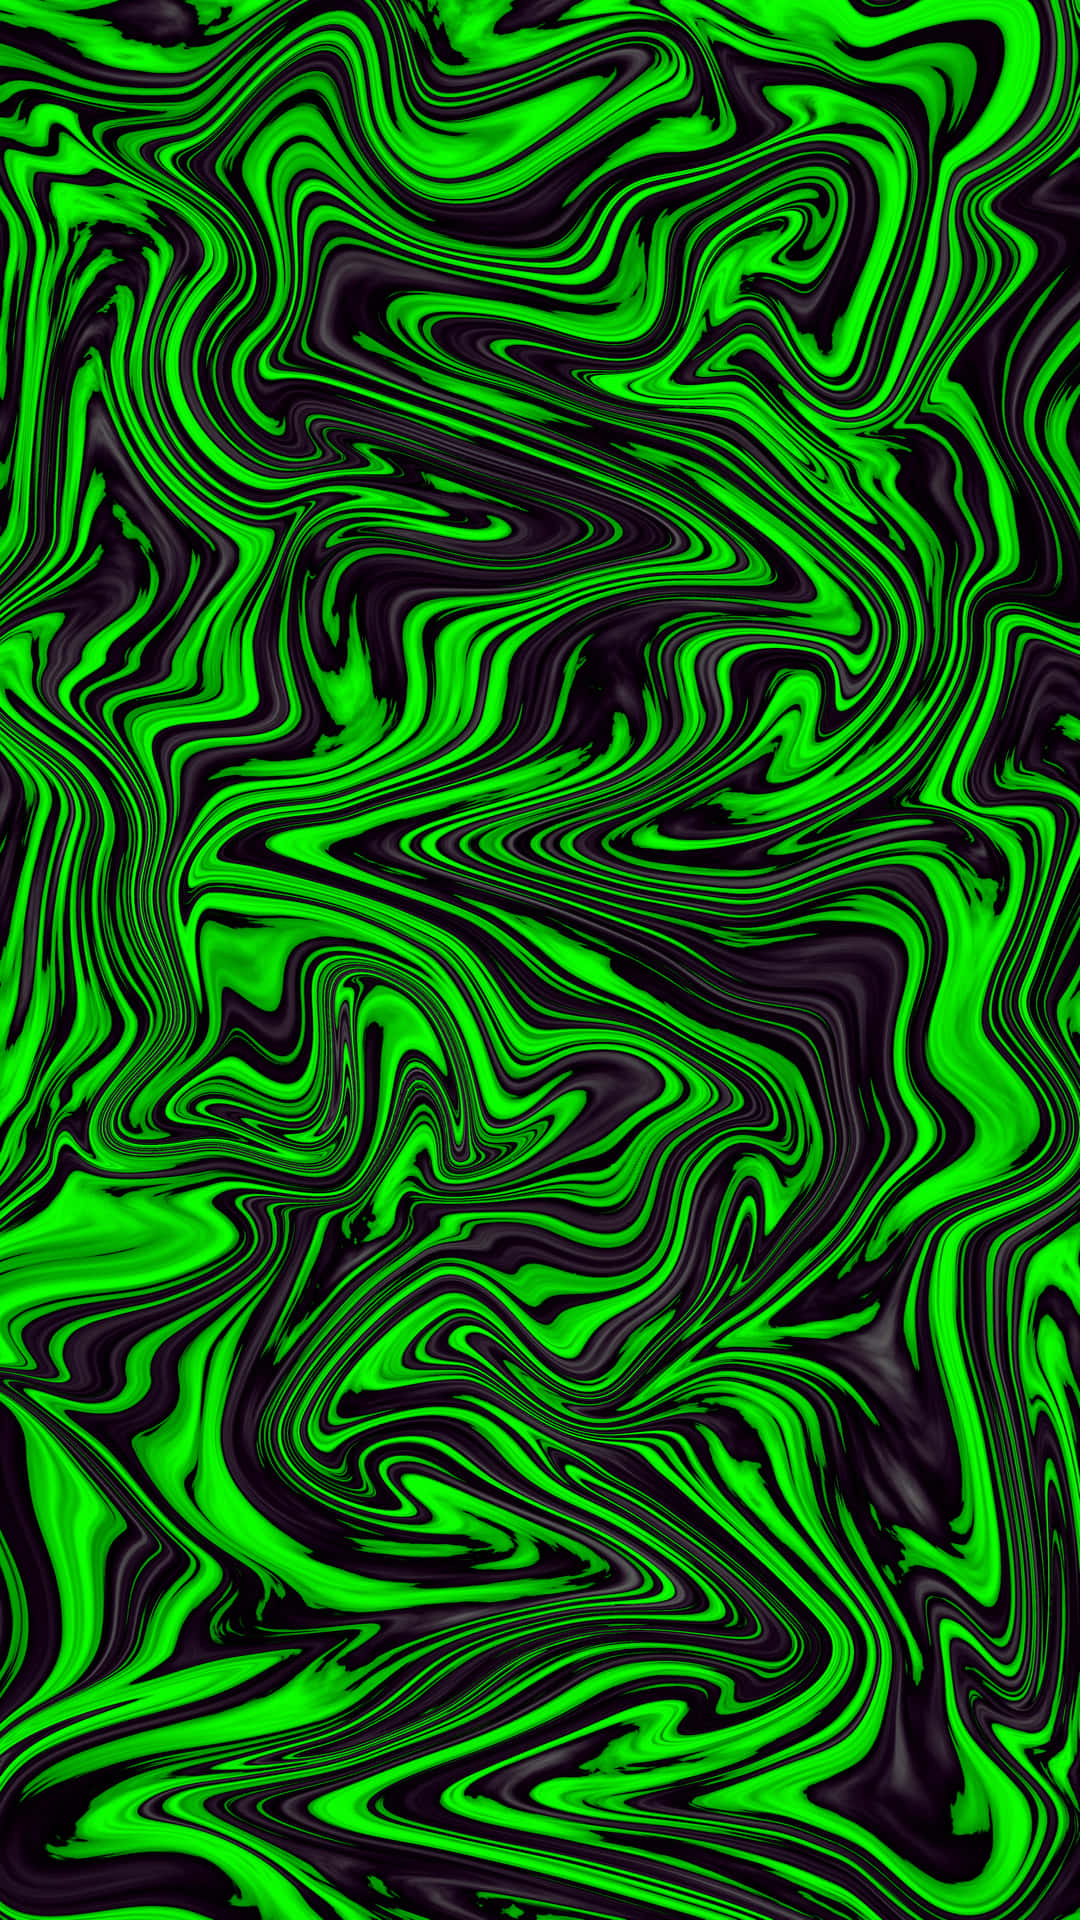 A Green And Black Swirling Background